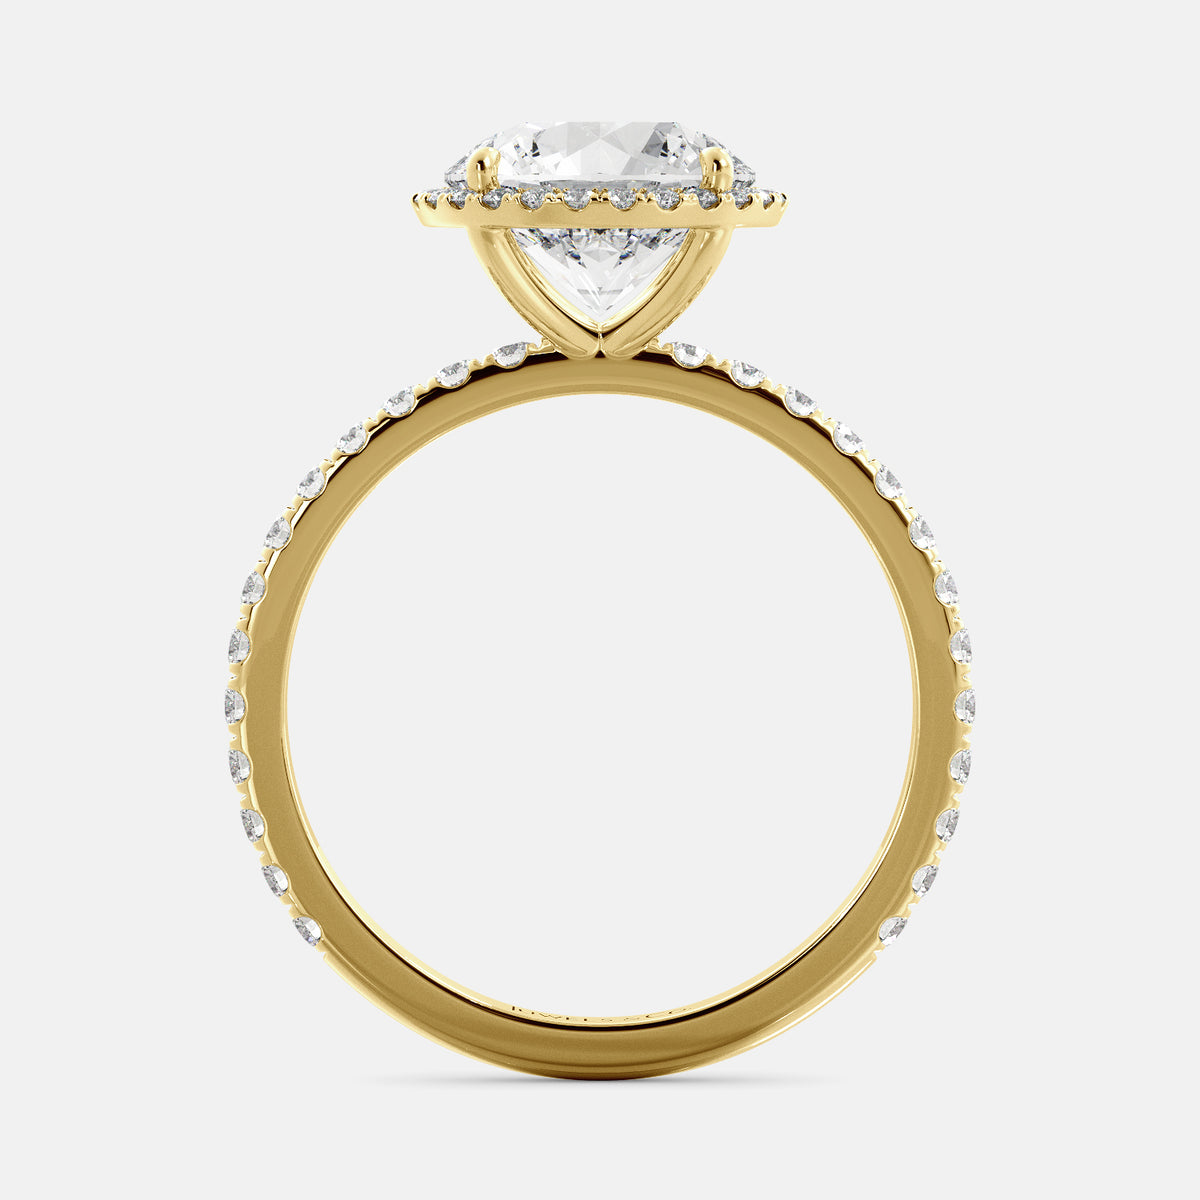 This image shows a beautiful round halo lab-diamond ring with pavé on a yellow gold band. The ring features a round brilliant-cut lab diamond in the center, surrounded by a halo of smaller diamonds. The band is pavé-set with smaller diamonds, creating a sparkling and elegant look. The ring is made of 14k yellow gold and is available in a variety of sizes.